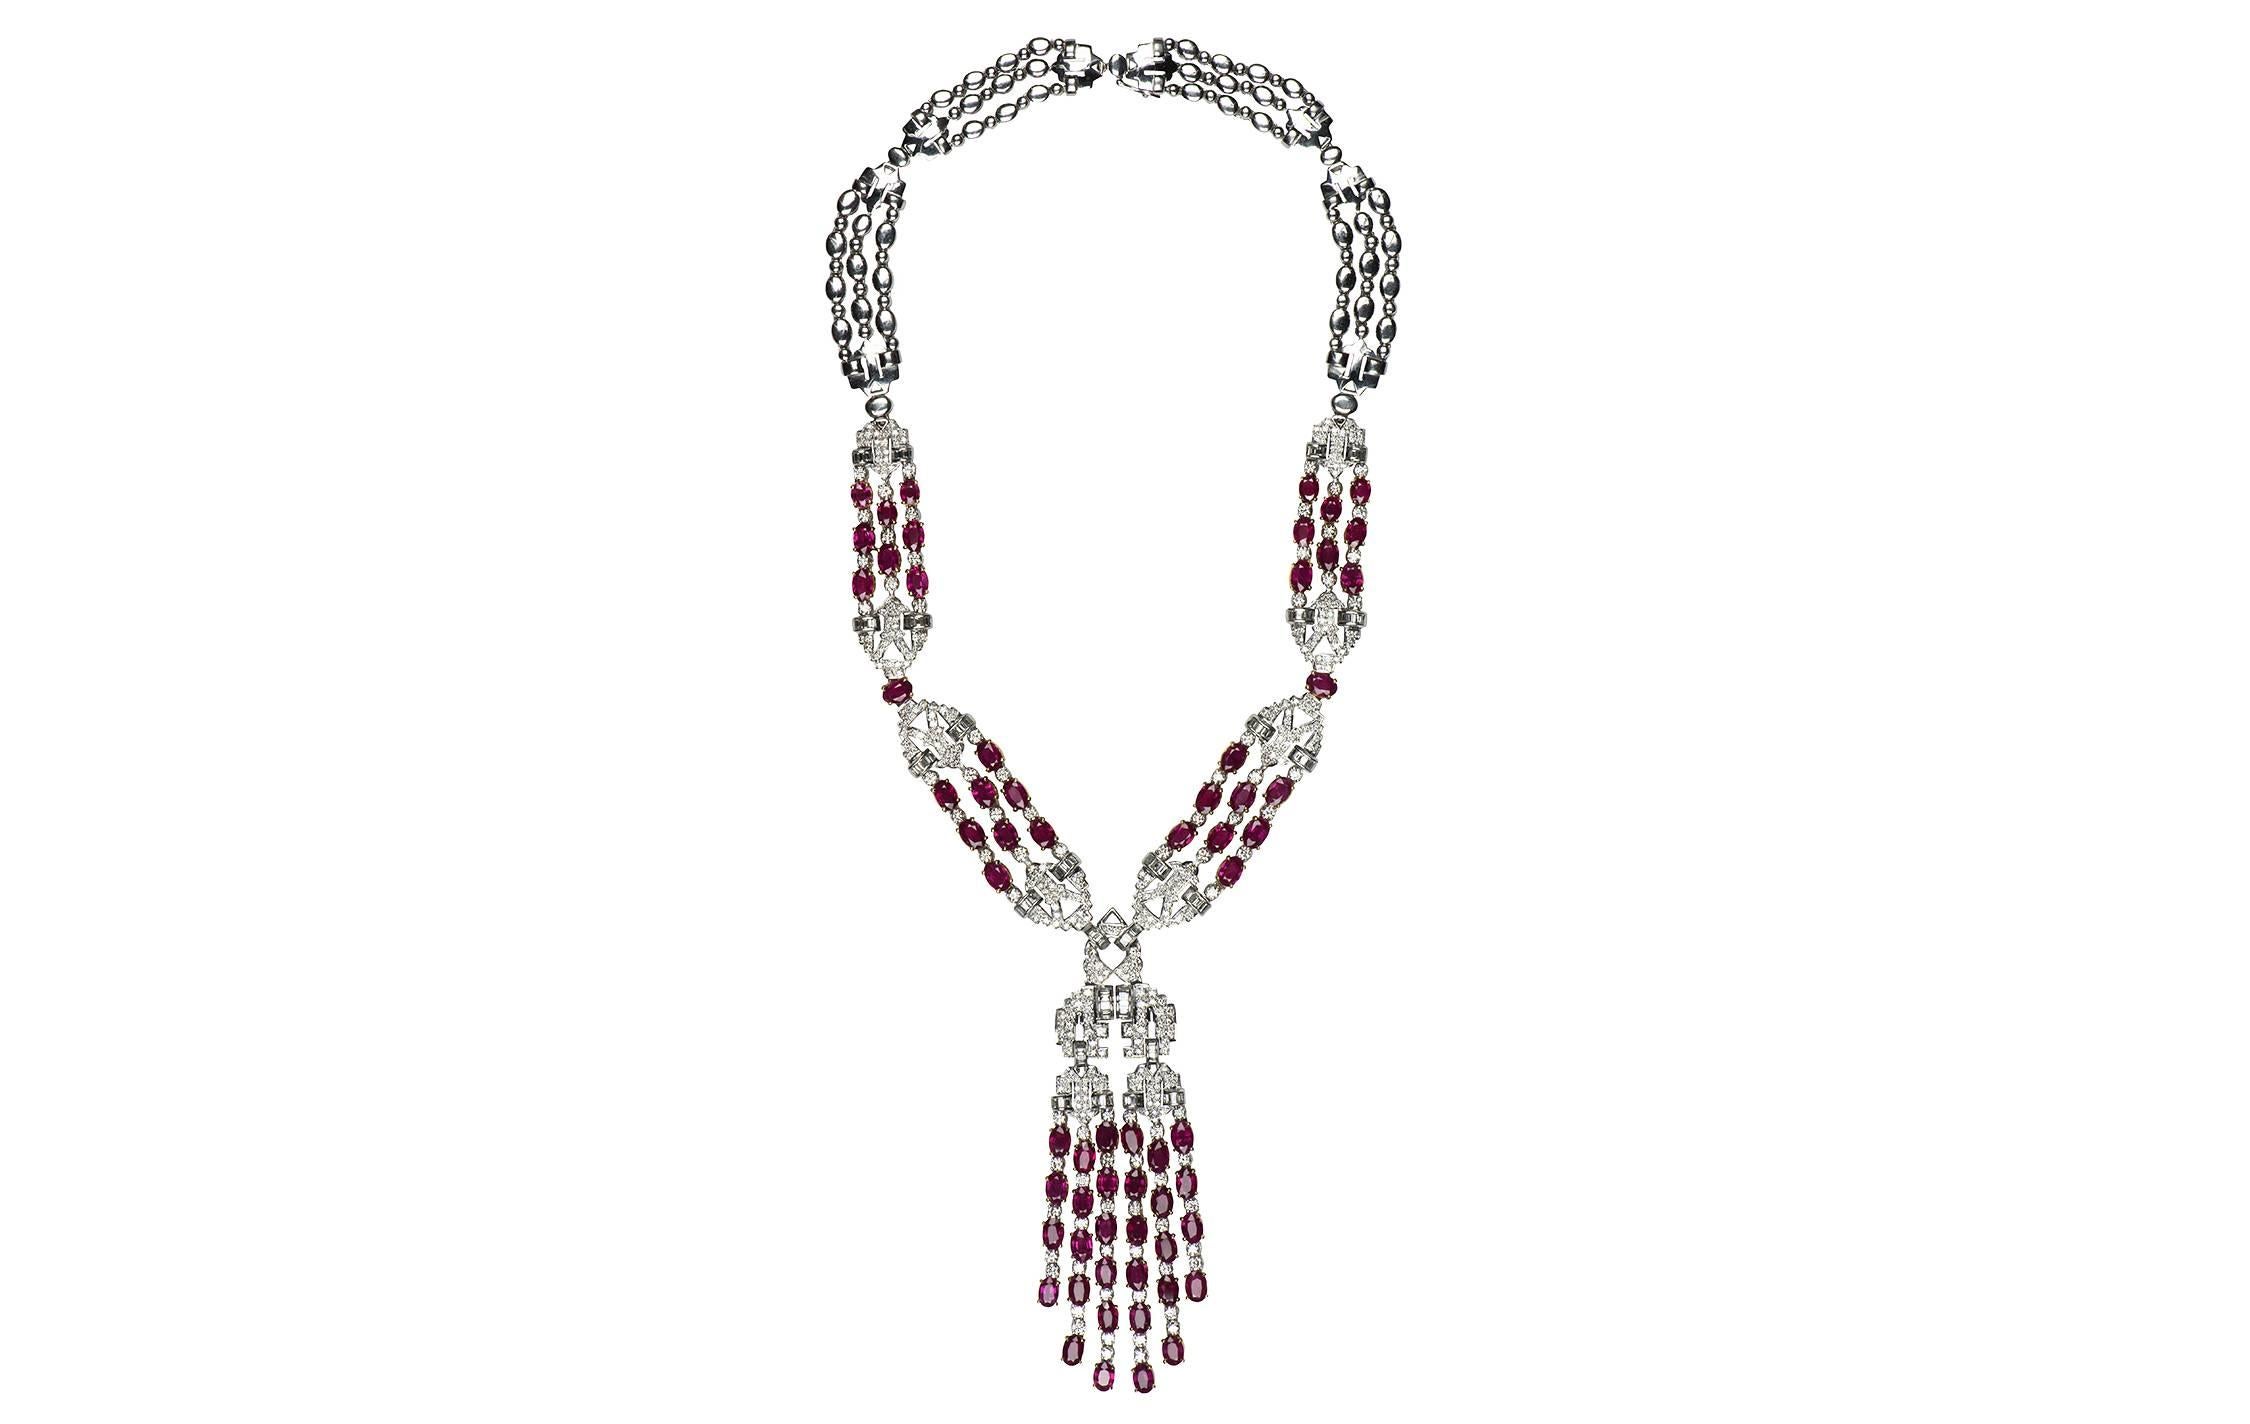 A stunning ruby and diamond 18k white gold lariat necklace.  The necklace contains 64 oval rubies totaling an estimated weight of 30.98cts, with a combination of 414 round brilliant and baguette shape diamonds totaling an estimated weight of